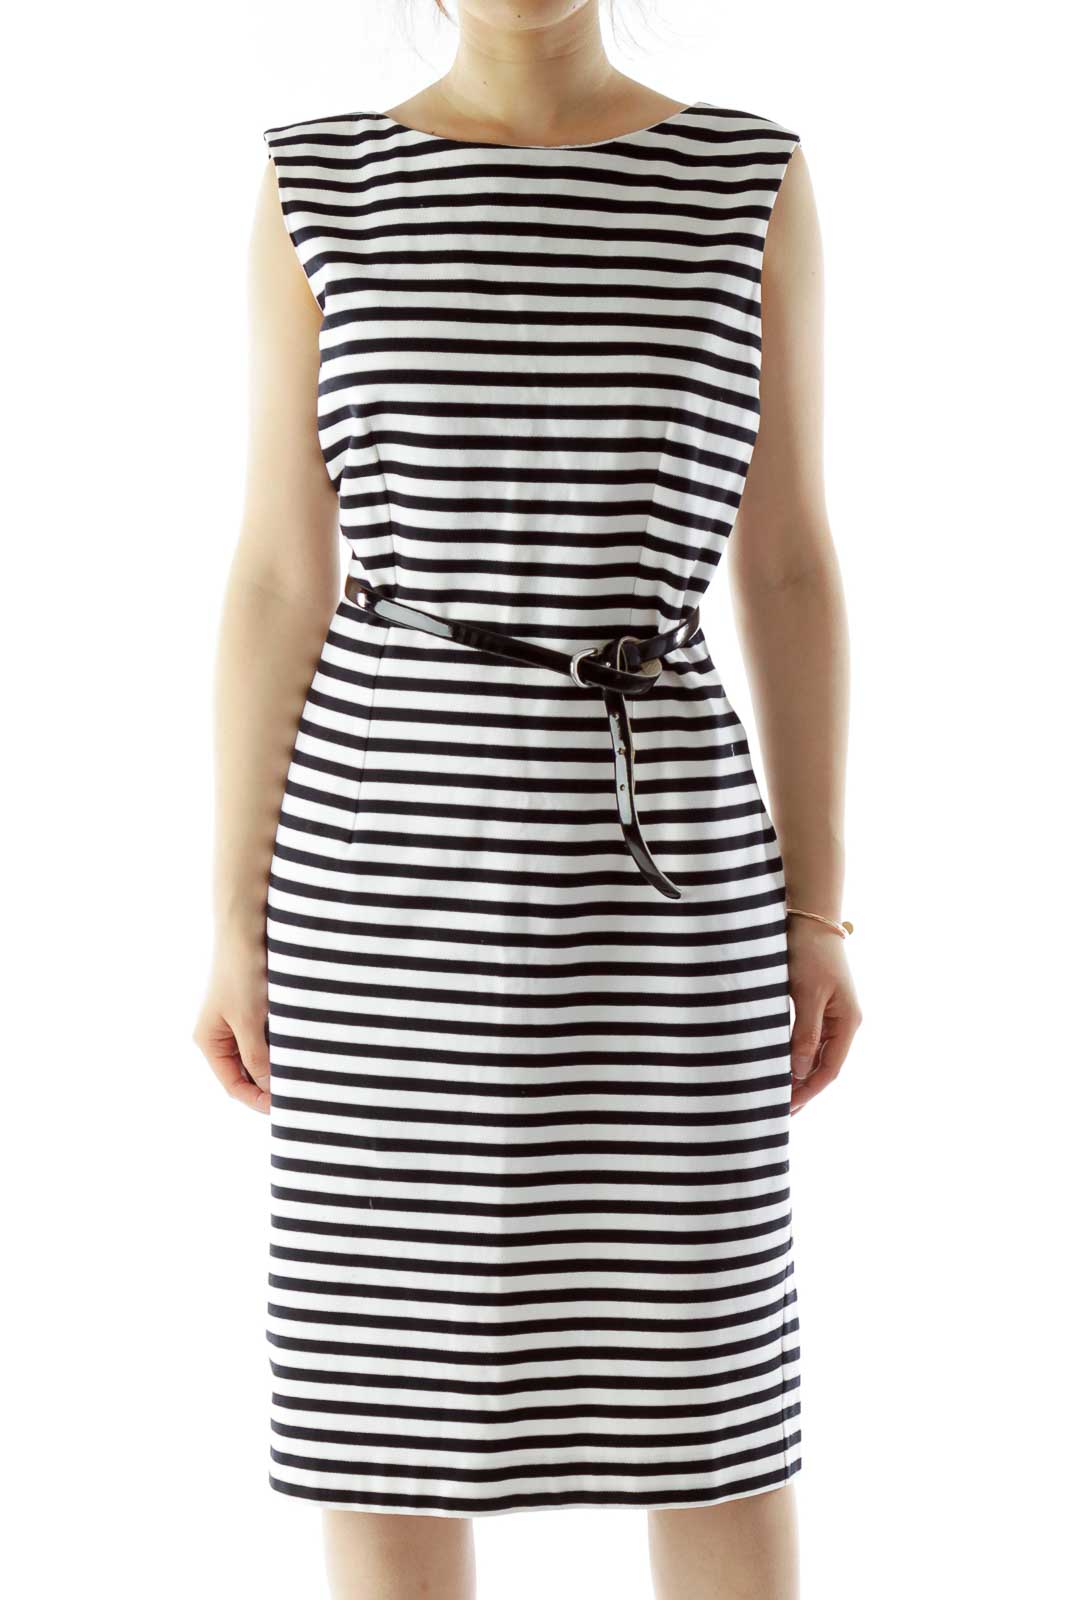 Black White Striped Belted Day Dress Front